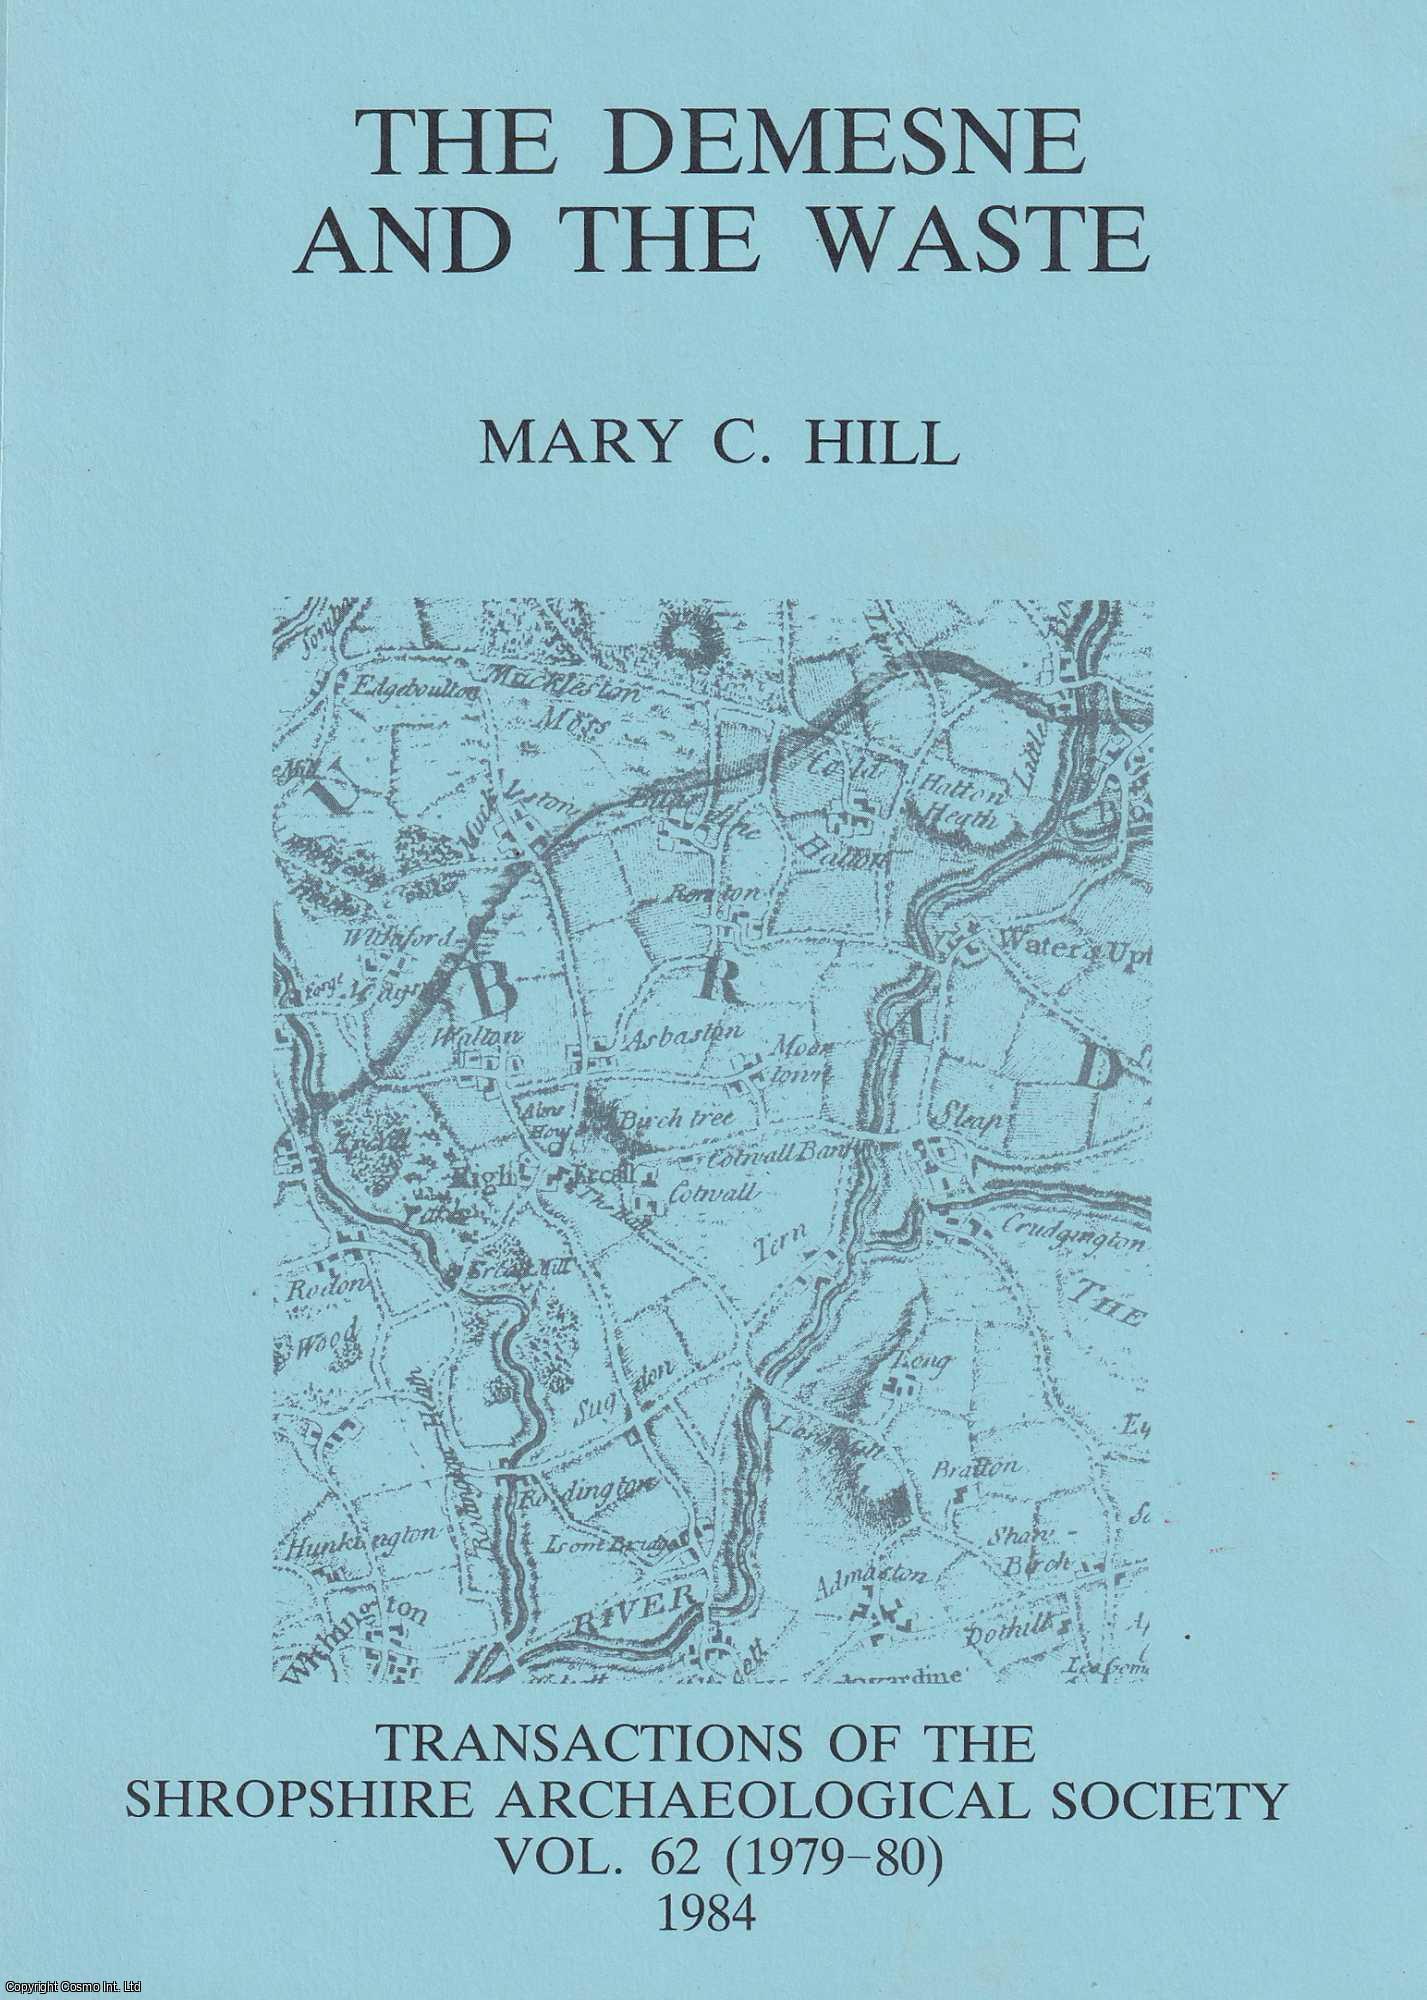 Mary C. Hill - The Demesne and The Waste. A Study of Medieval Inclosure on the Manor of High Ercall, 1086-1399.